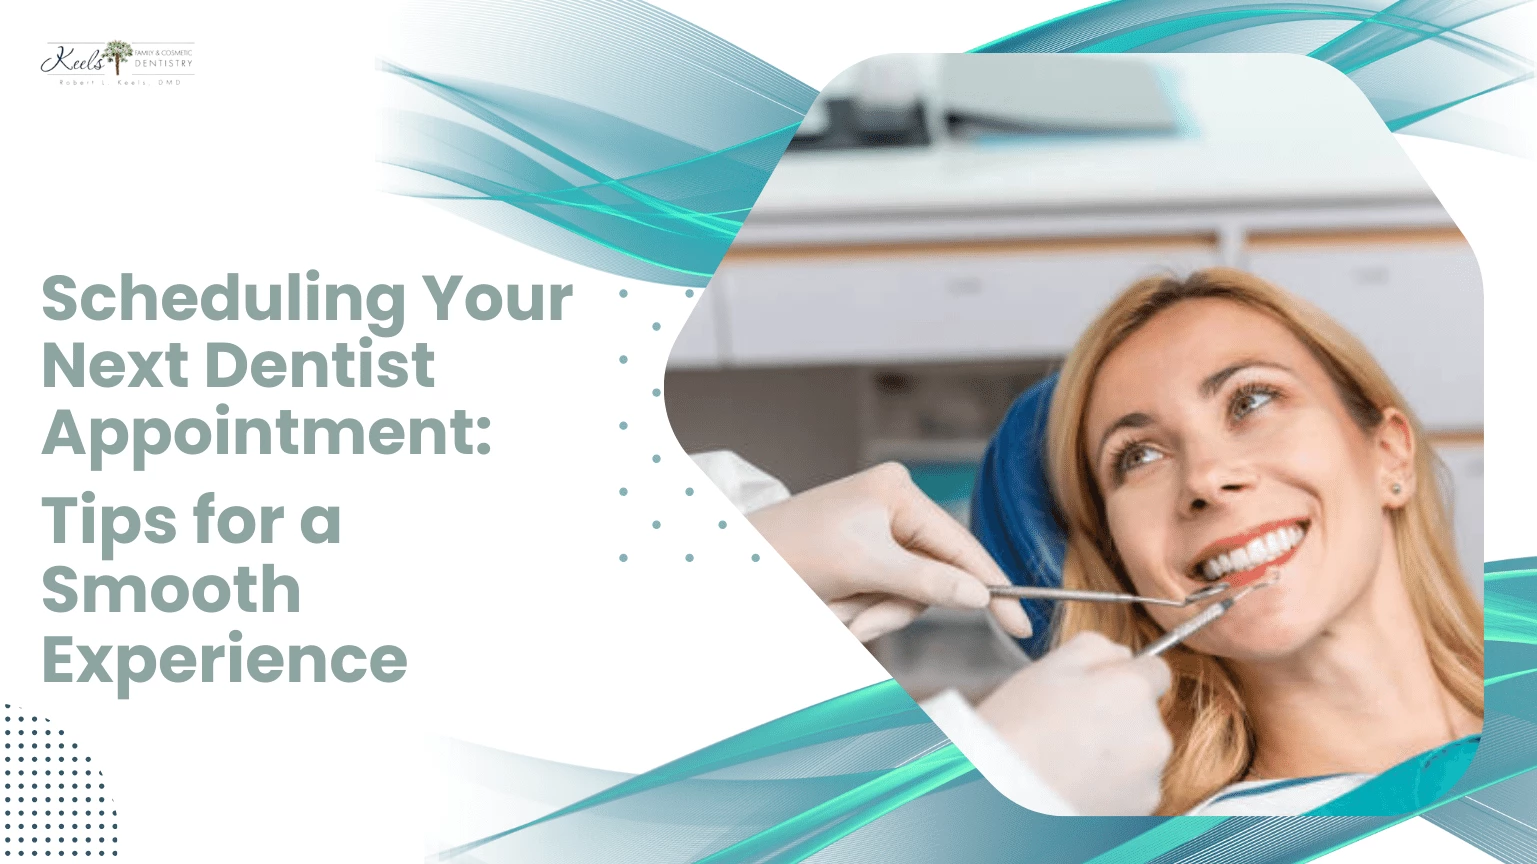 Scheduling Your Next Dentist Appointment Tips for a Smooth Experience